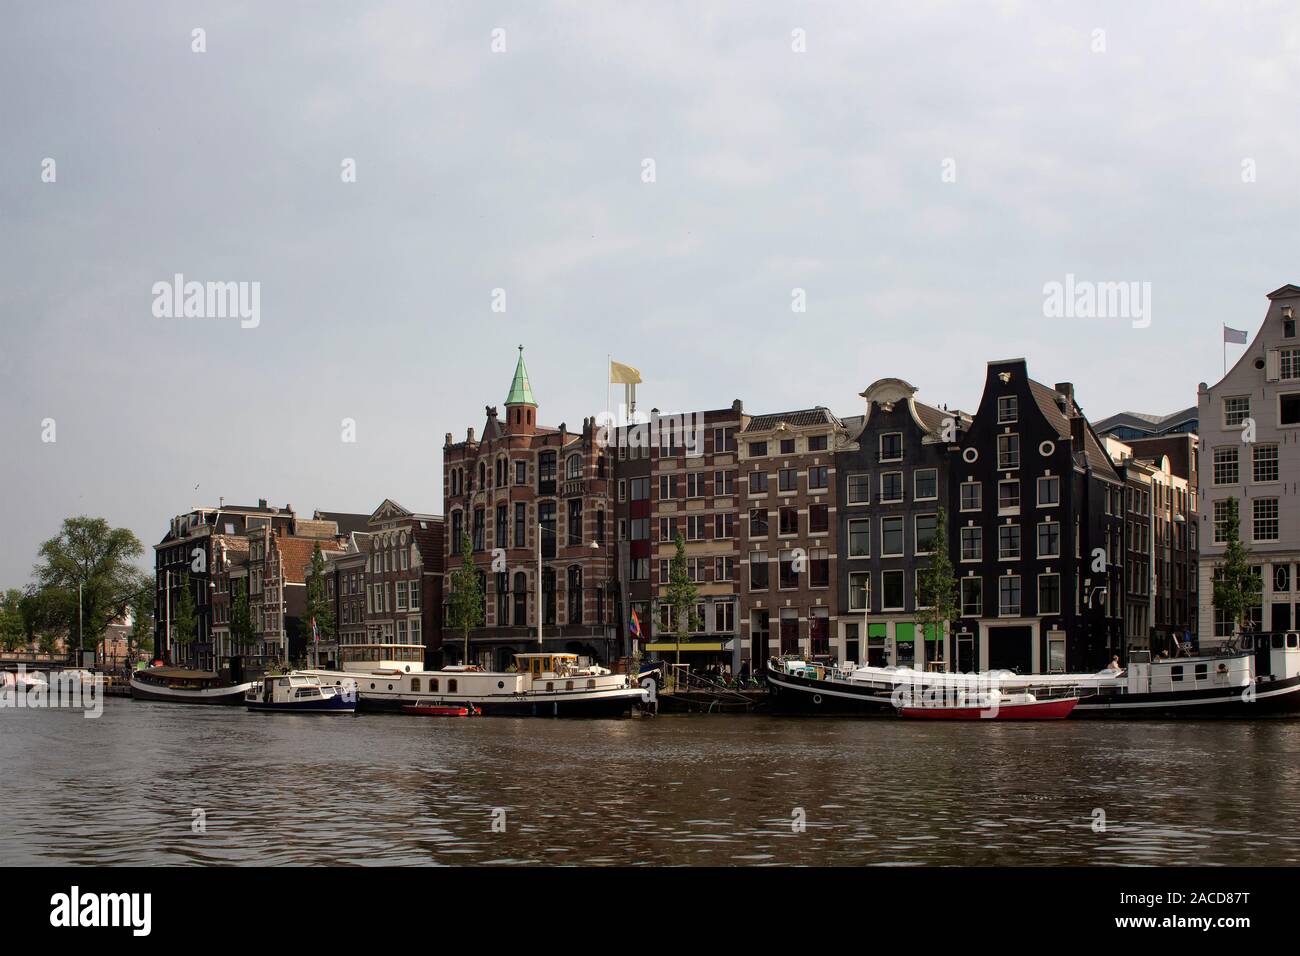 View of Amstel river, canal boats and historical, traditional and typical buildings reflecting Dutch architectural style in Amsterdam. It is a summer Stock Photo